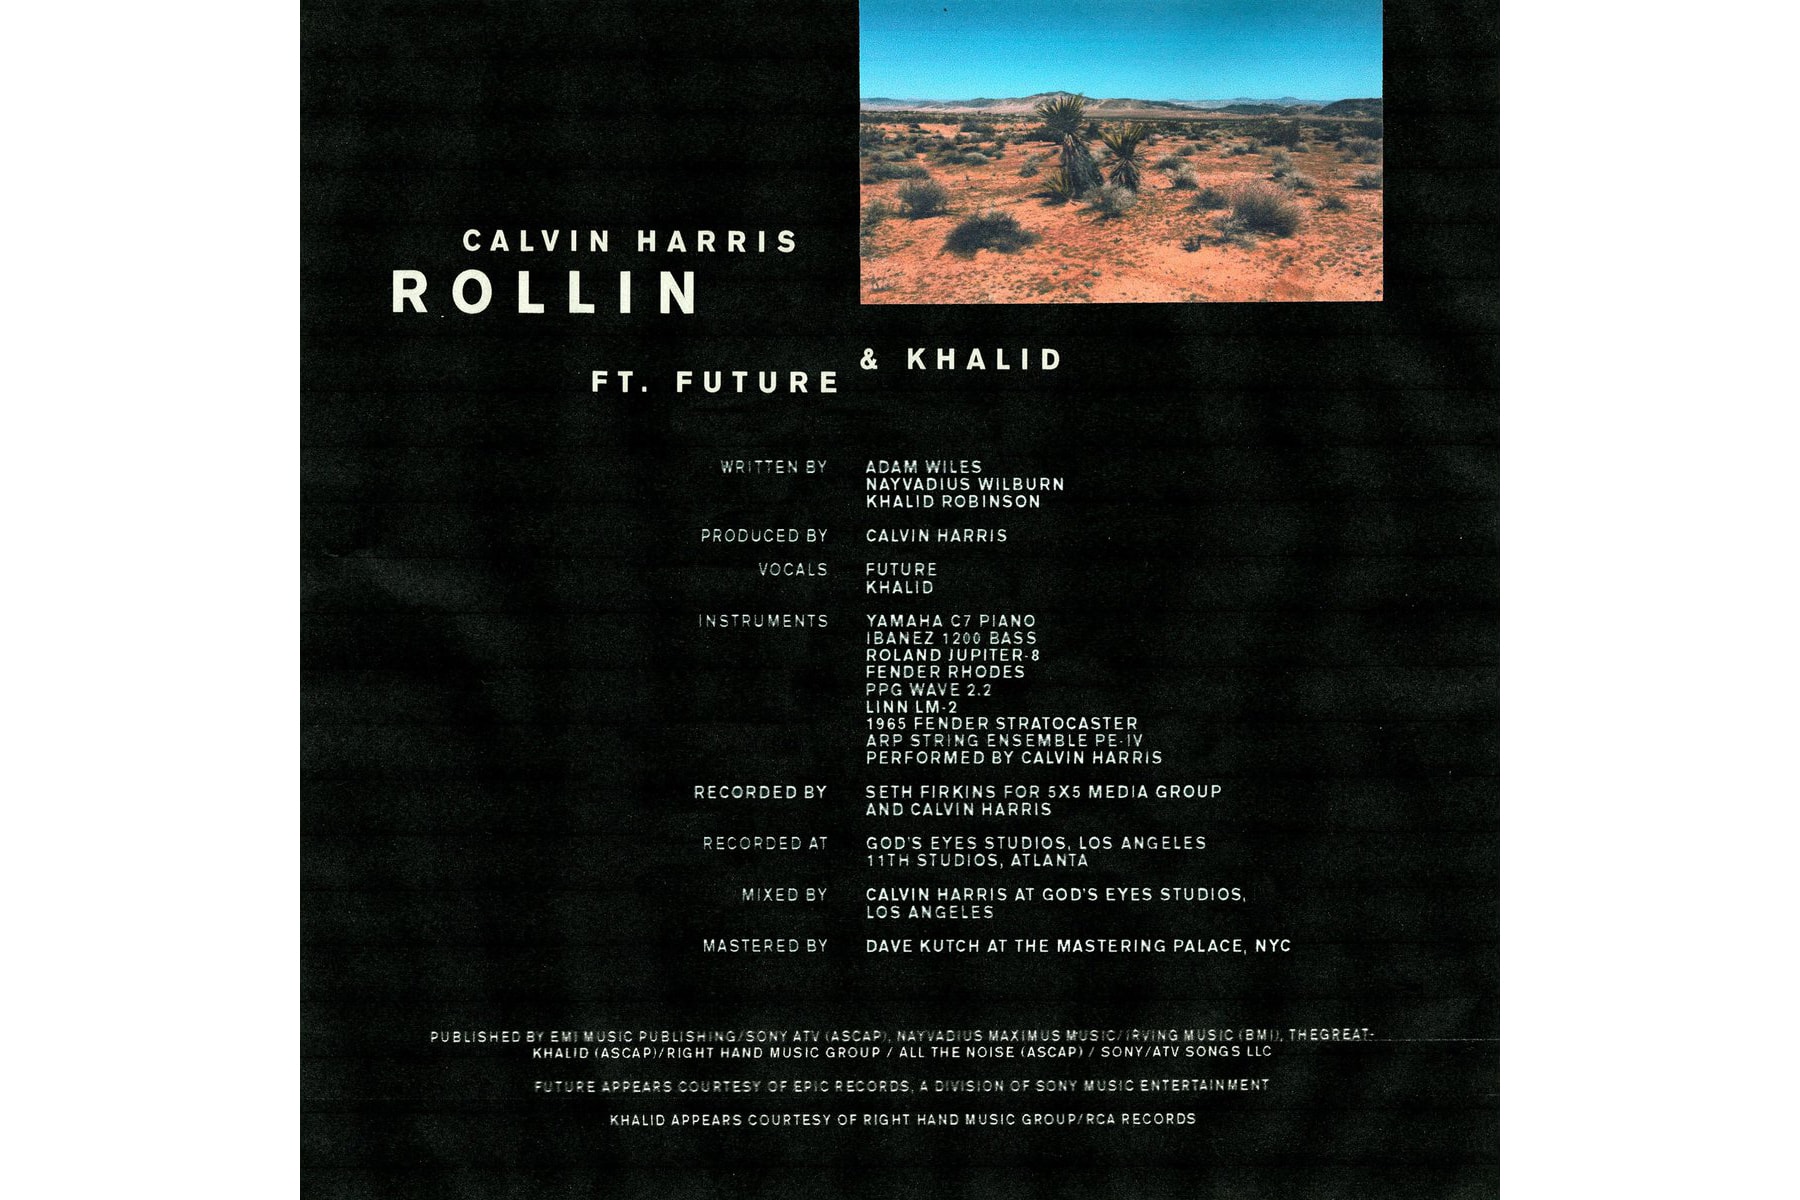 Calvin Harris Announces "Rollin" Single Featuring Future and Khalid, Dropping Friday, May 12.